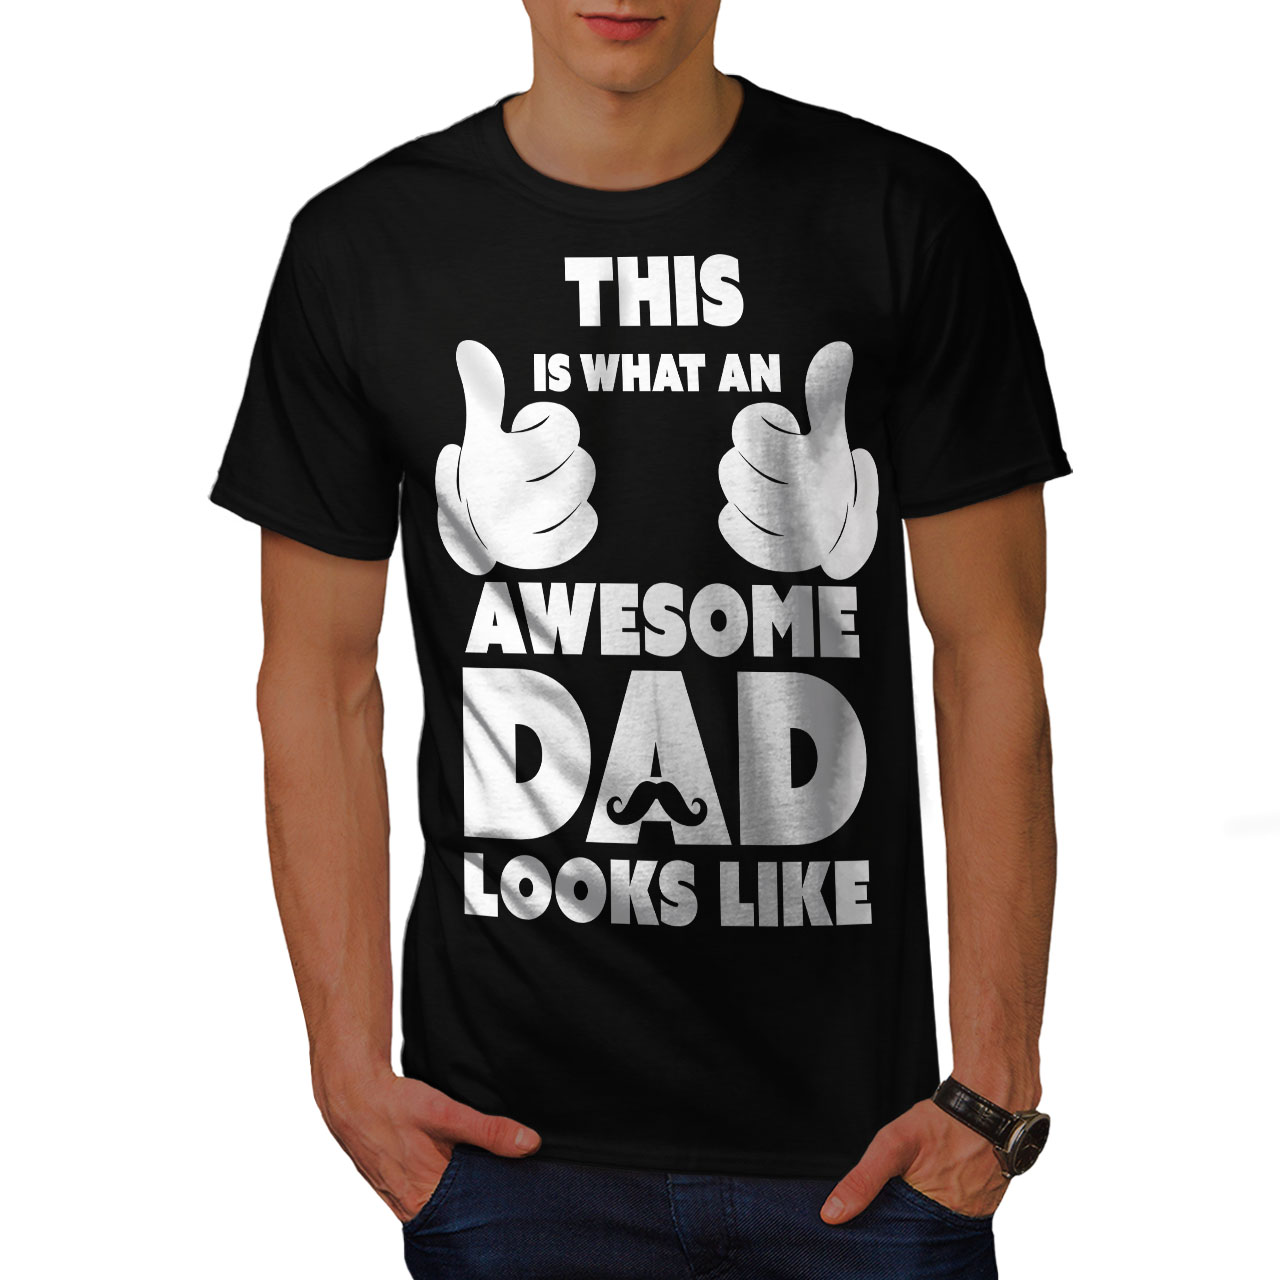 Wellcoda Awesome Dad Cool Funny Mens T Shirt Father Graphic Design Printed Tee Ebay